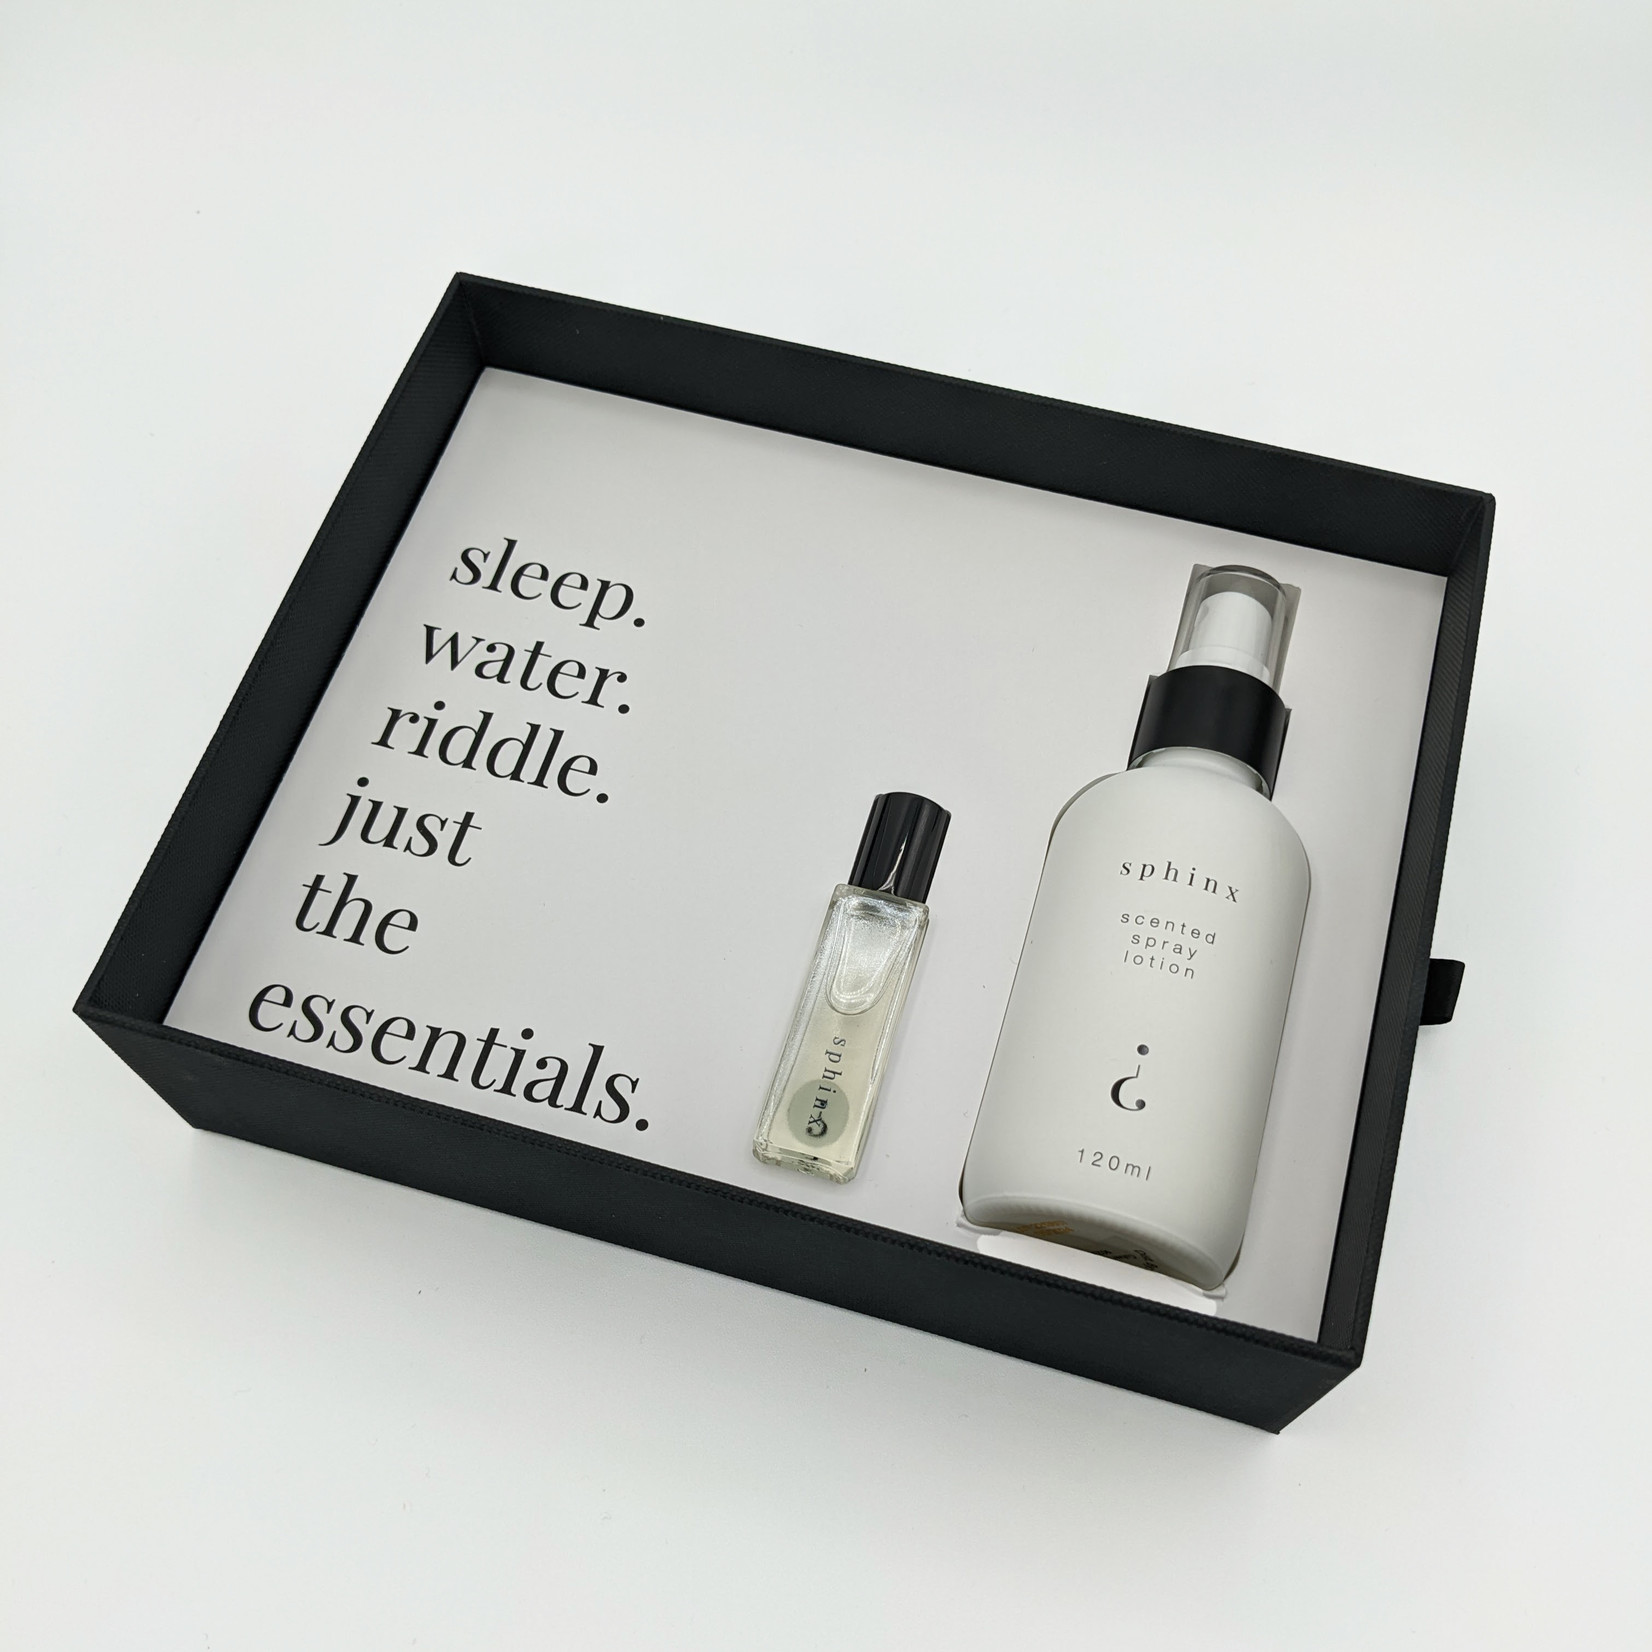 Riddle Oil Riddle Essentials Gift Set